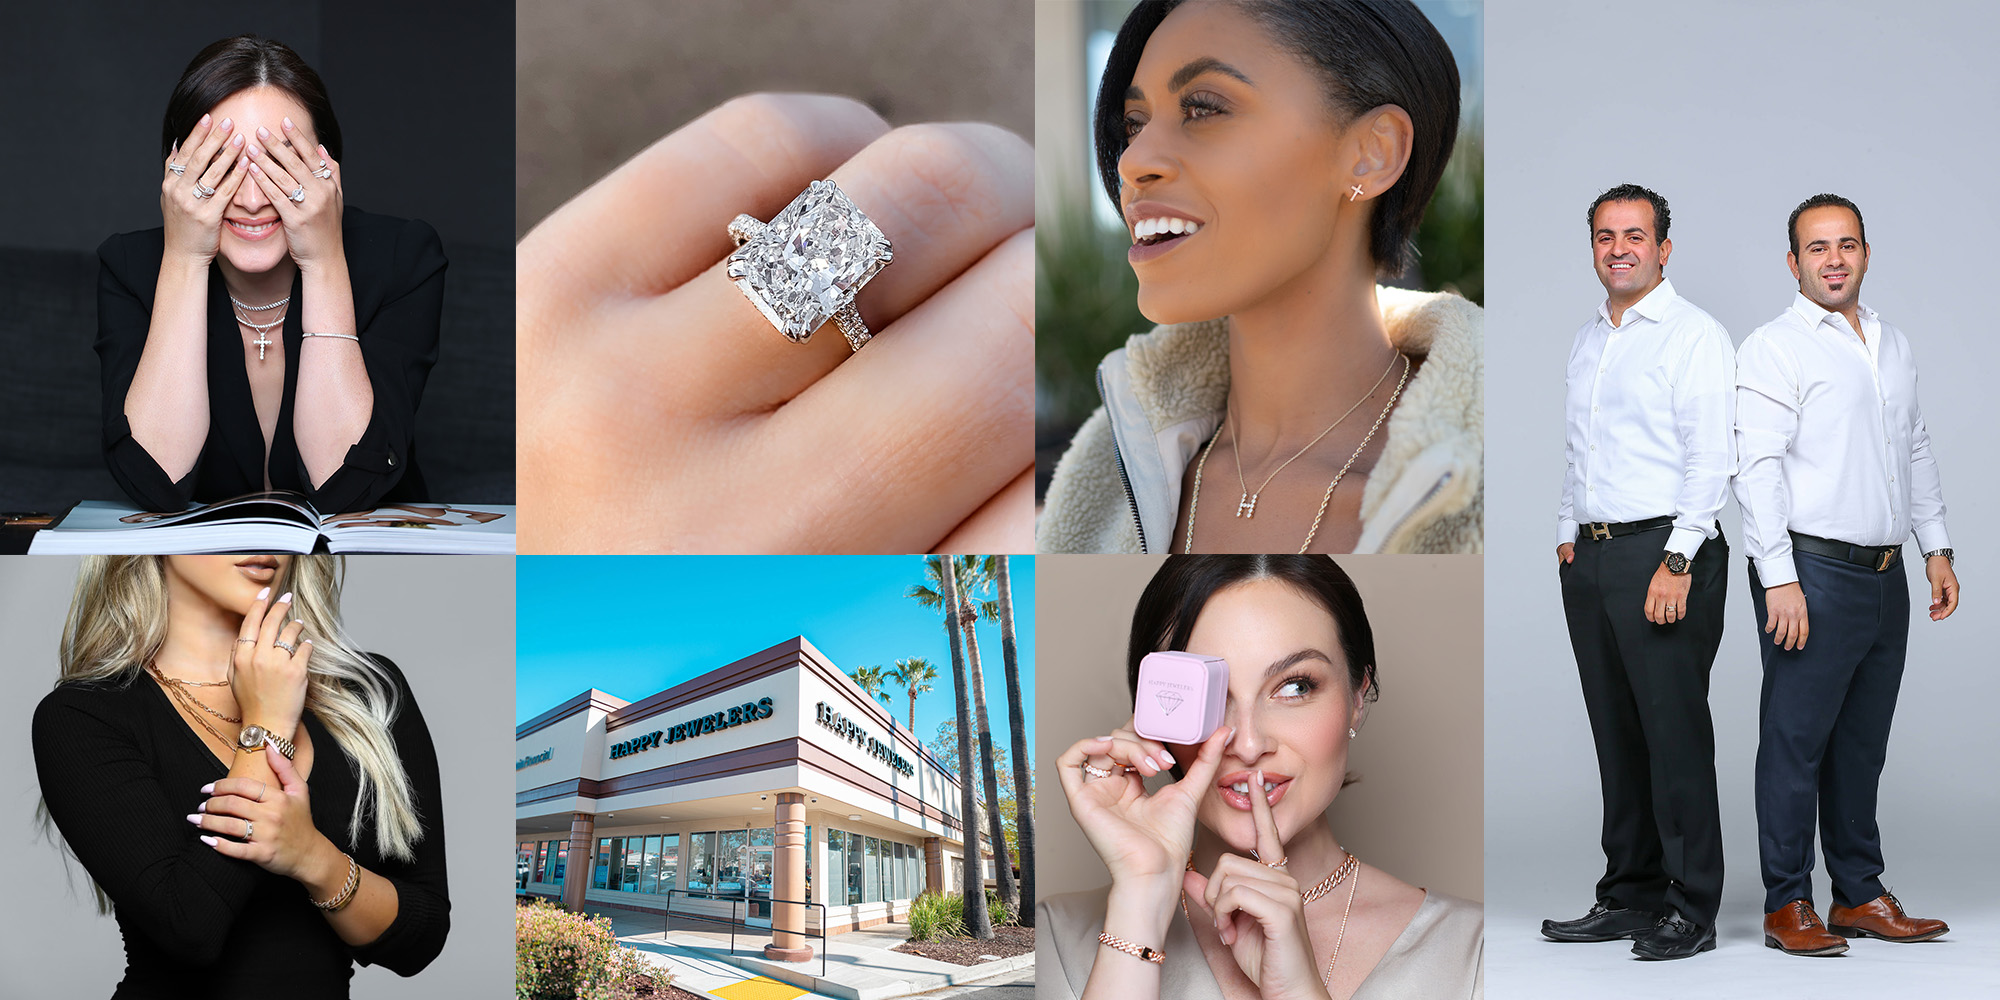 A Combination of Cutting-Edge Design and Guaranteed Customer Satisfaction Has Made Happy Jewelers an Orange County Jewelry Mainstay